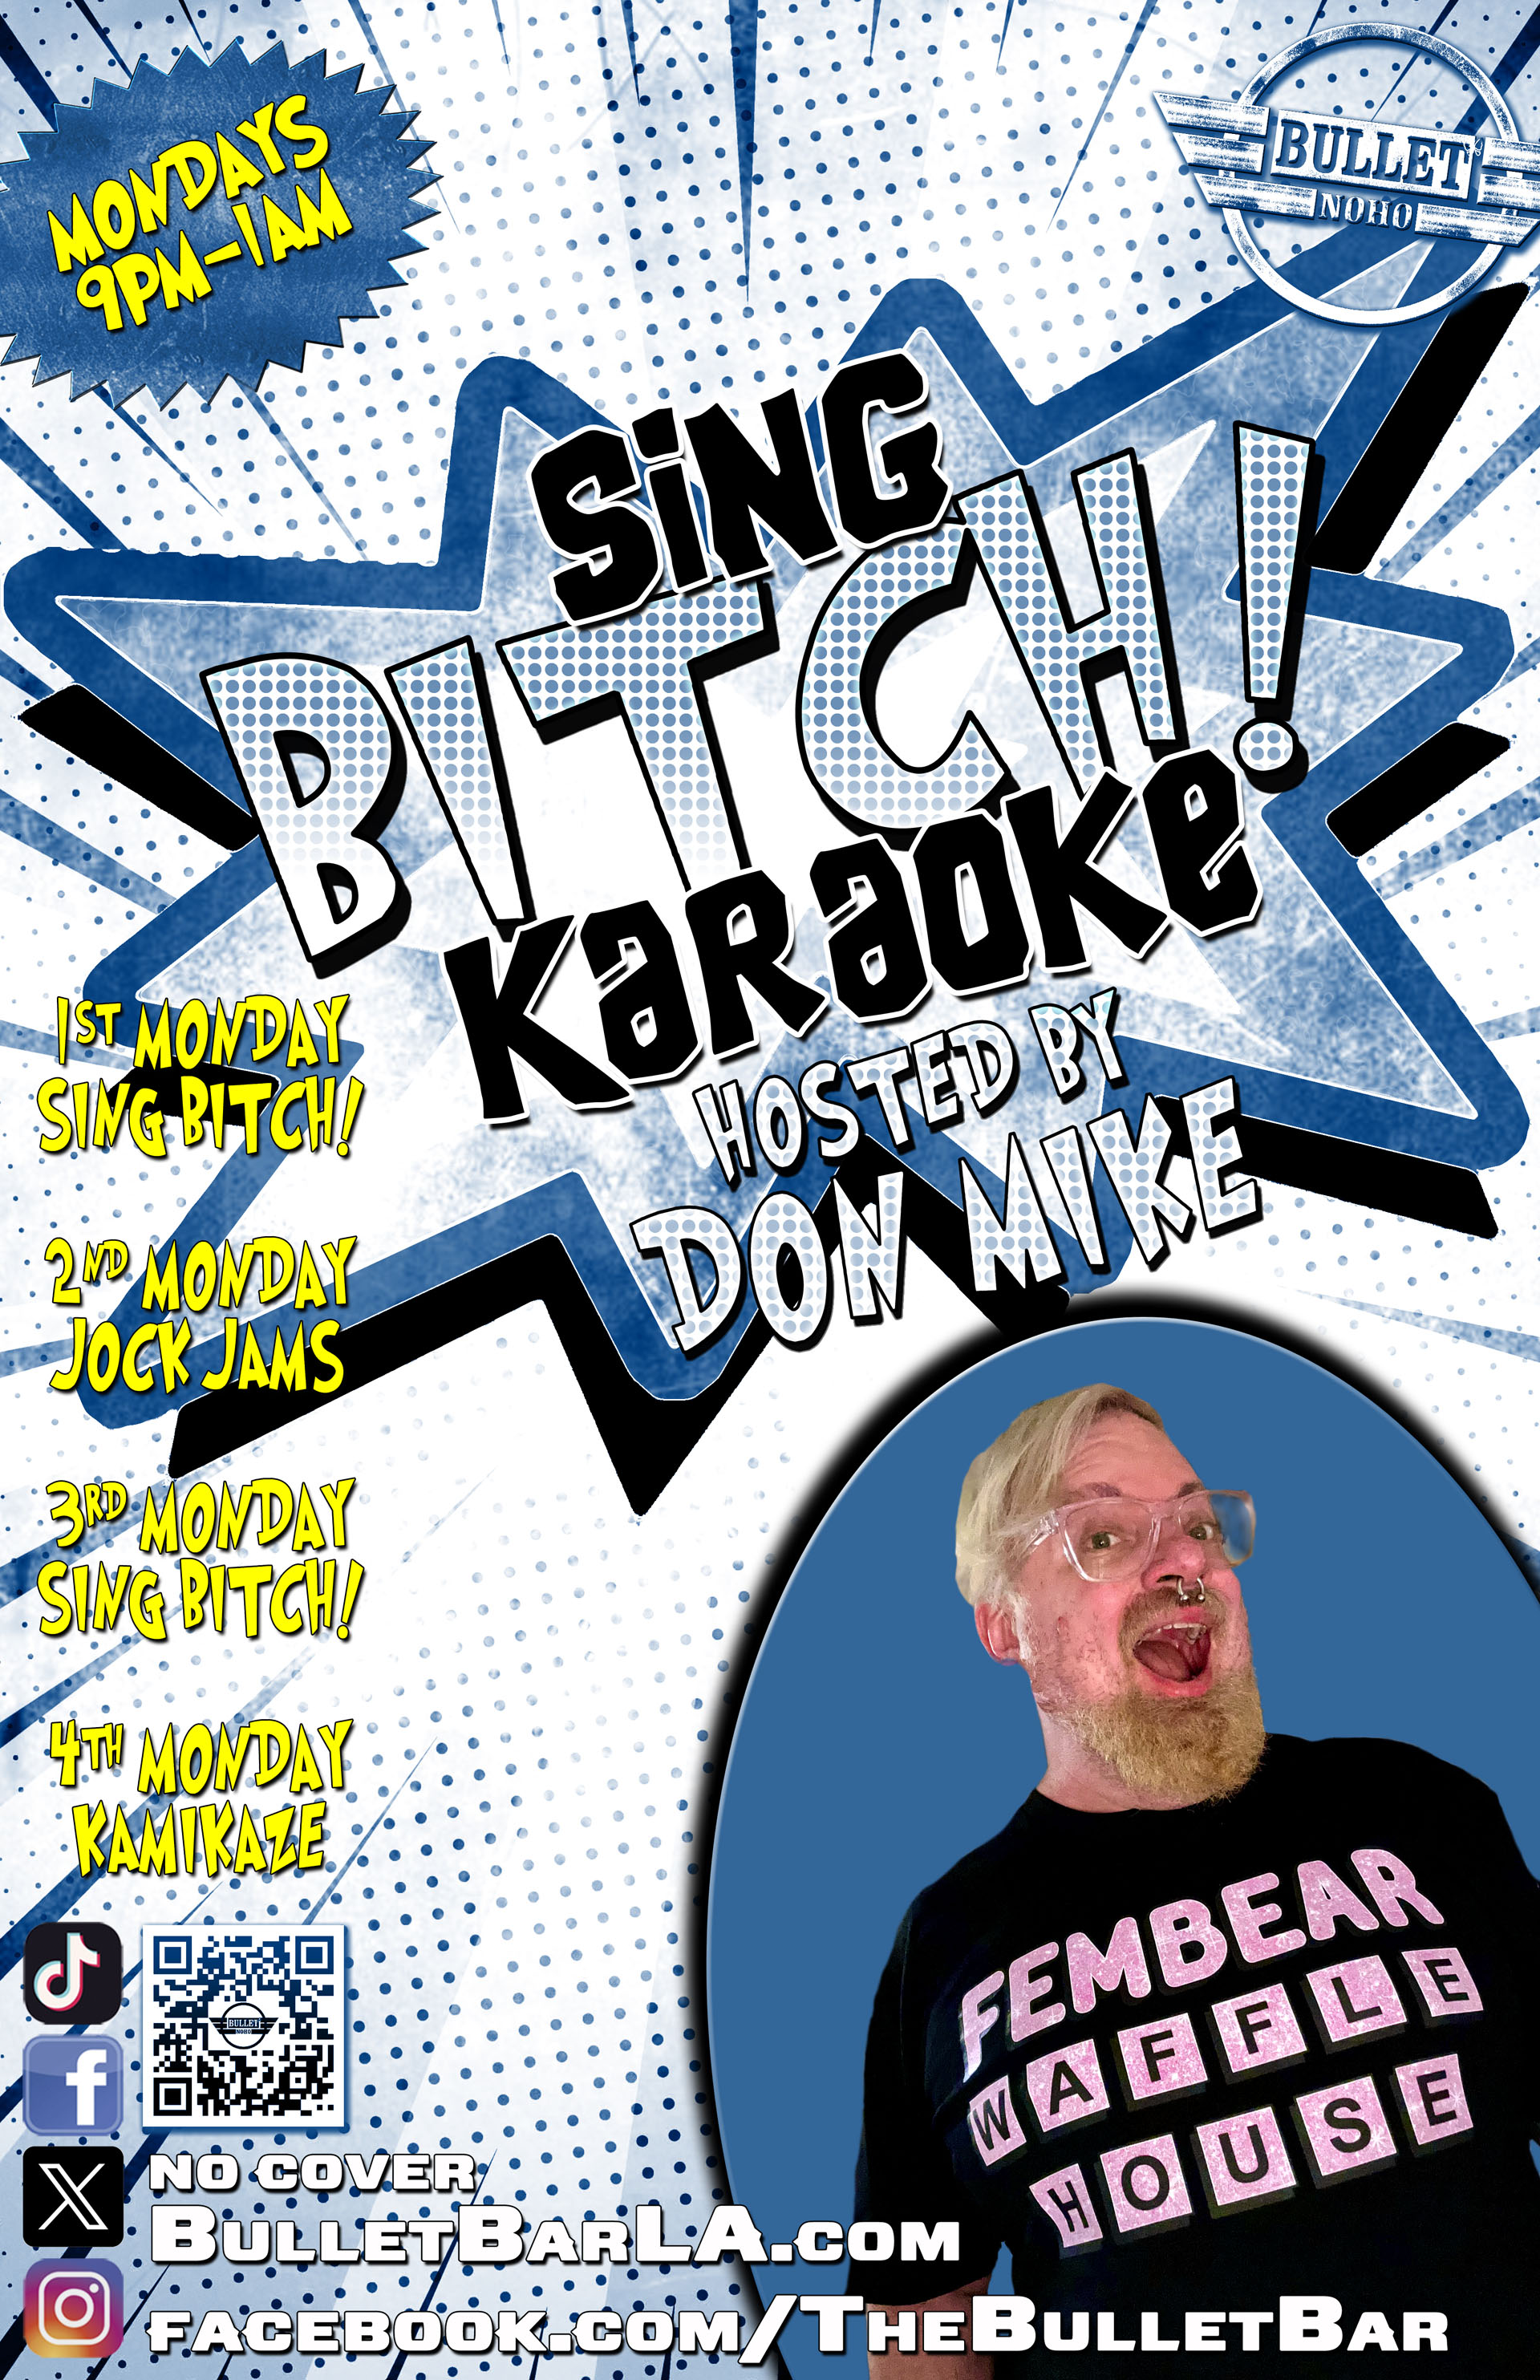 THE BULLET BAR Presents SING BITCH KARAOKE Hosted by DON MIKE: Monday Nights from 9:00 PM to 1:00 AM! No Cover!